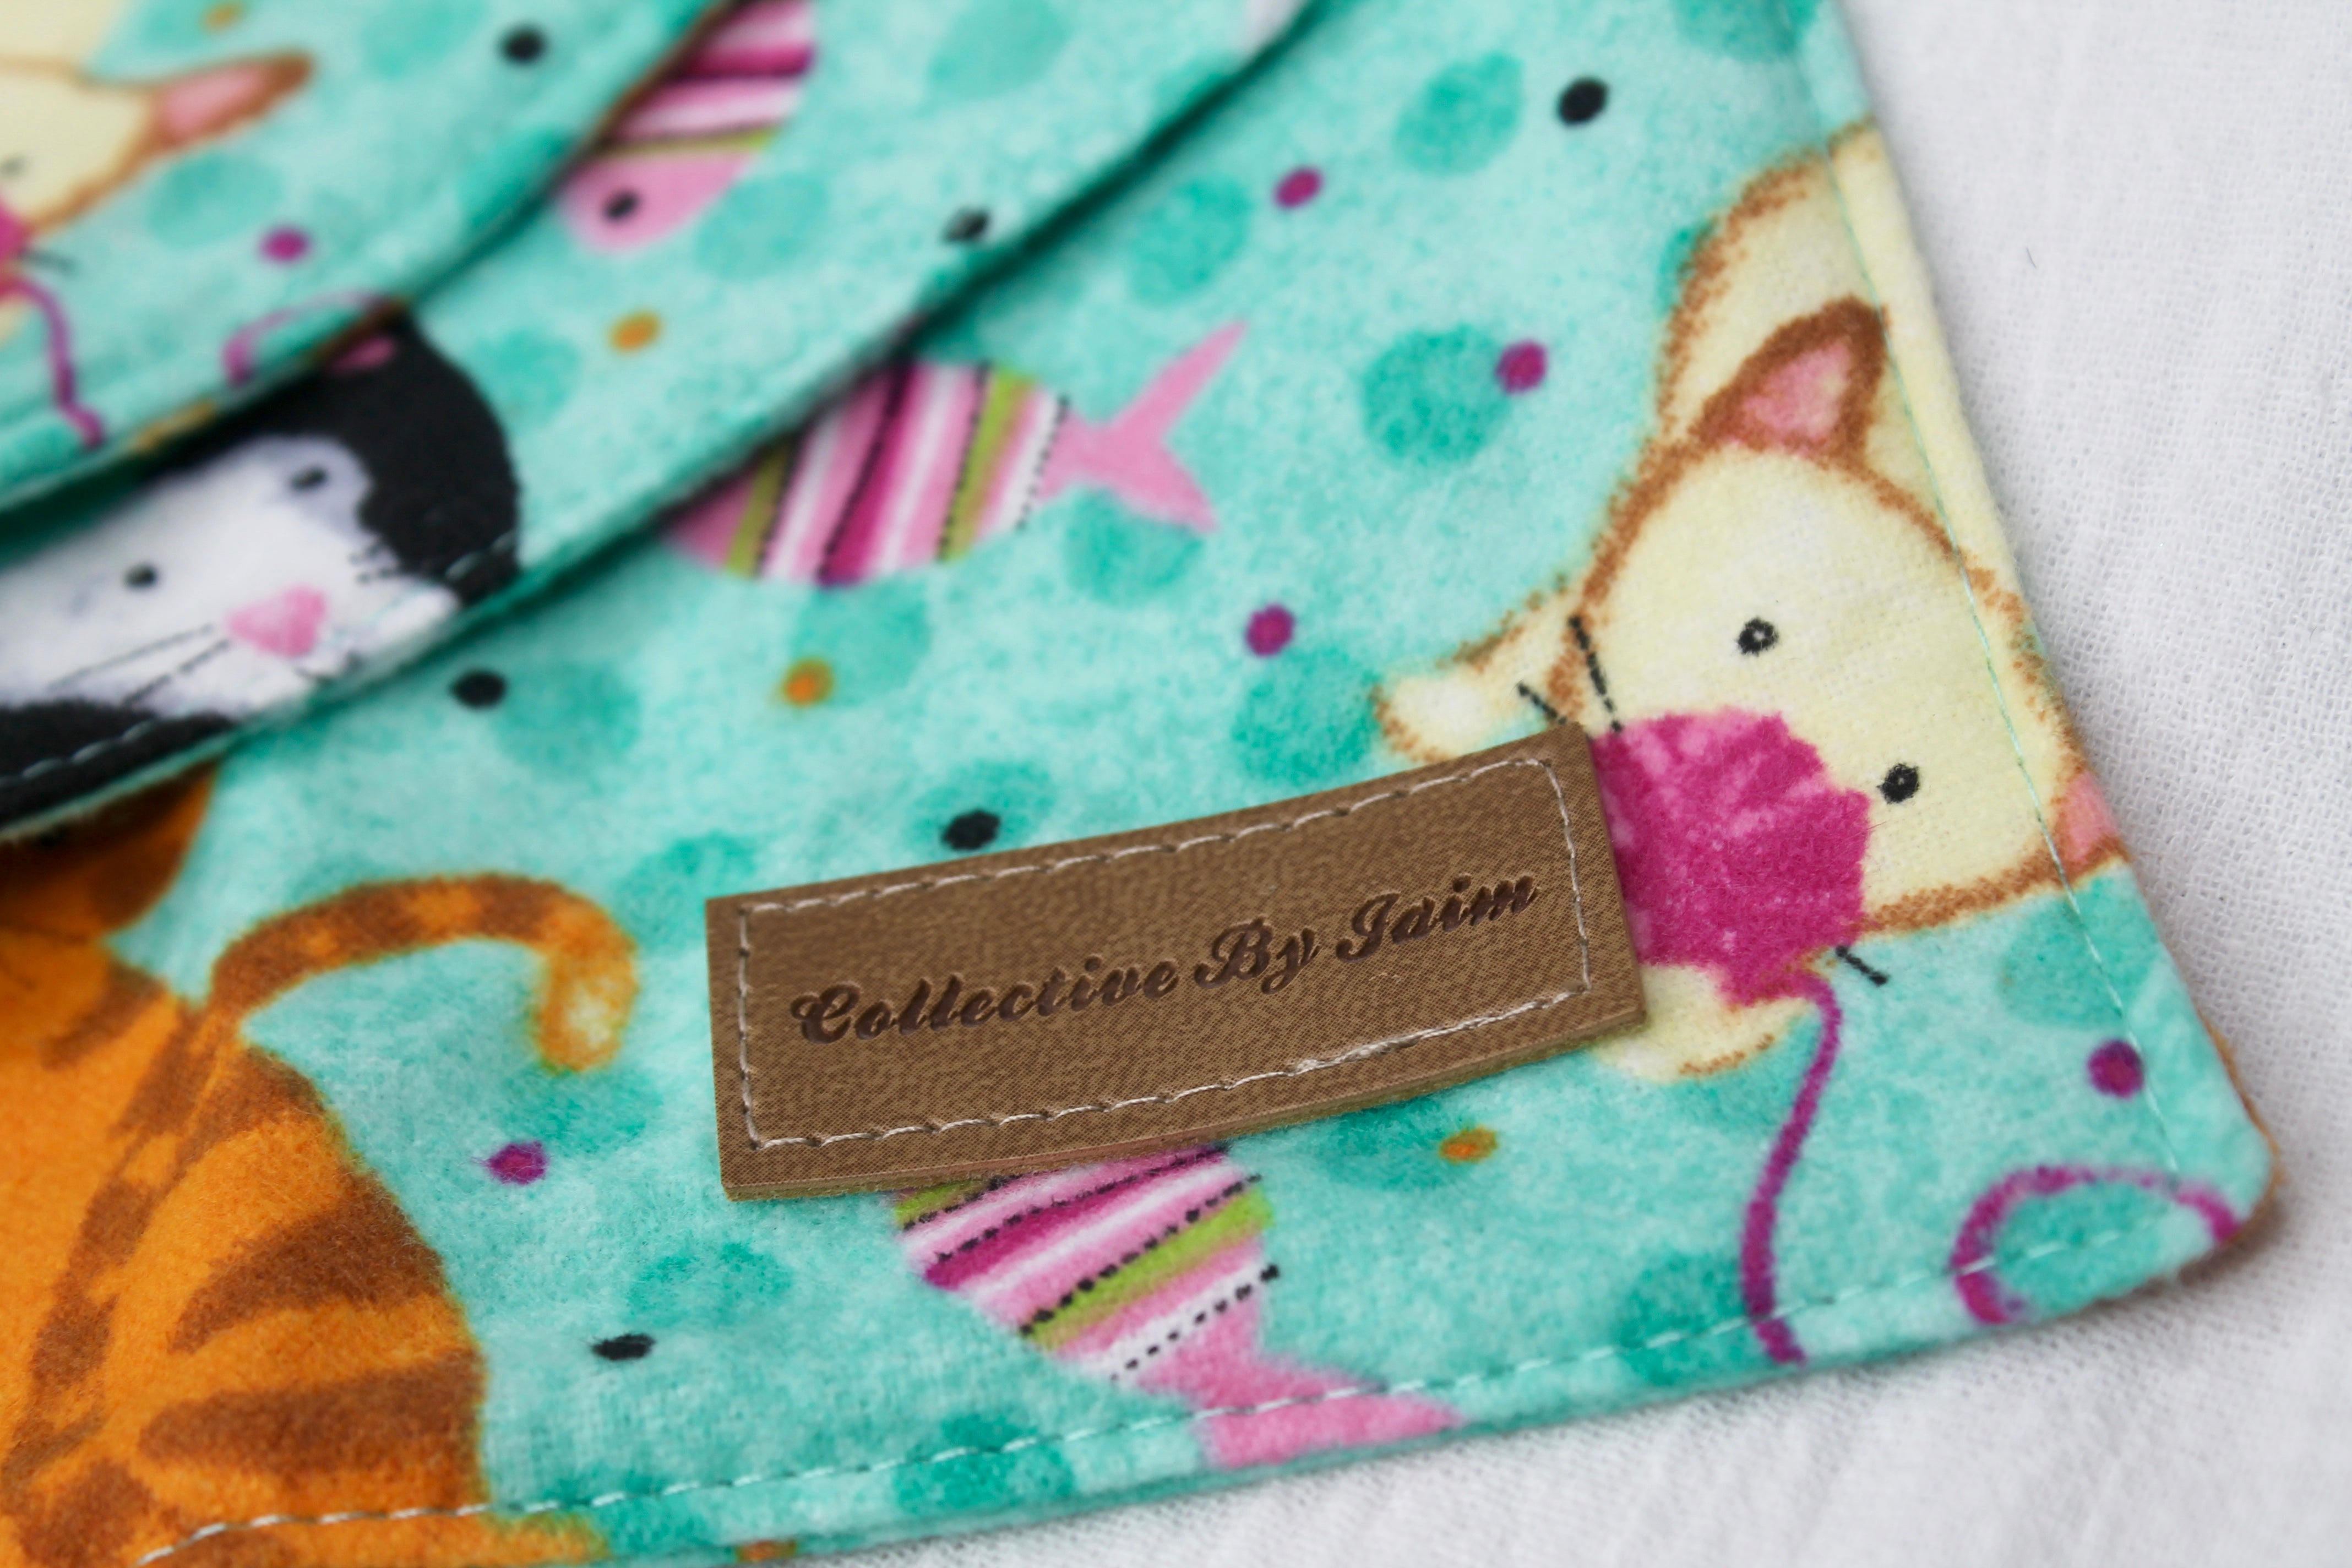 Cats At Play Nursery Blanket & Wipes Set